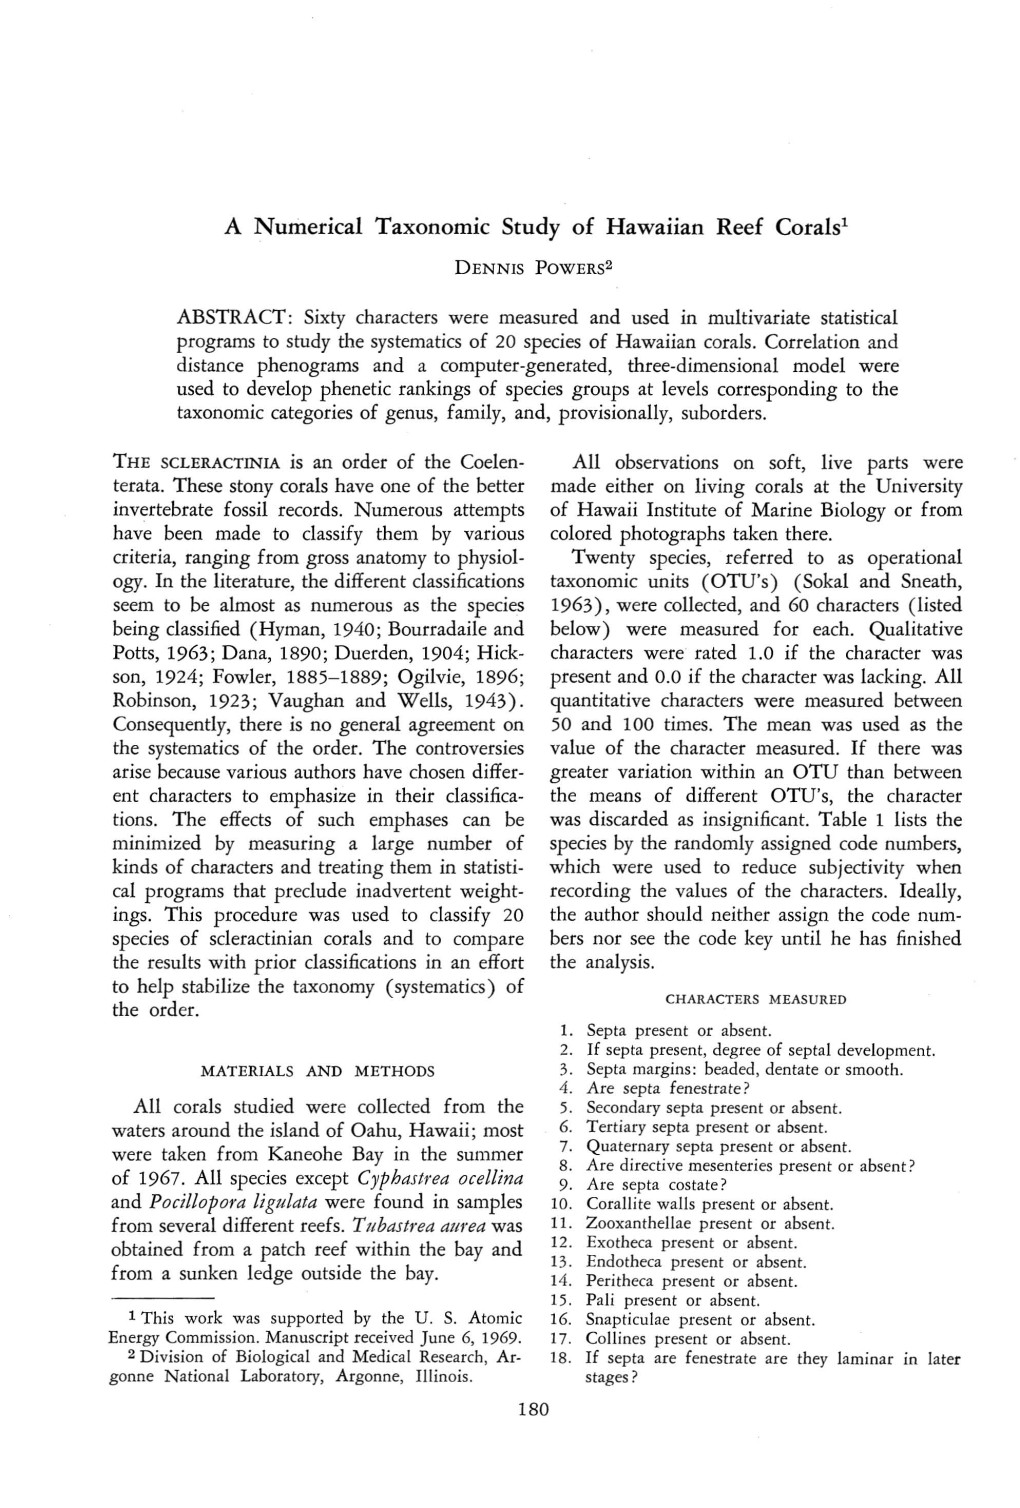 A Numerical Taxonomic Study of Hawaiian Reef Corals! DENNIS POWERS2